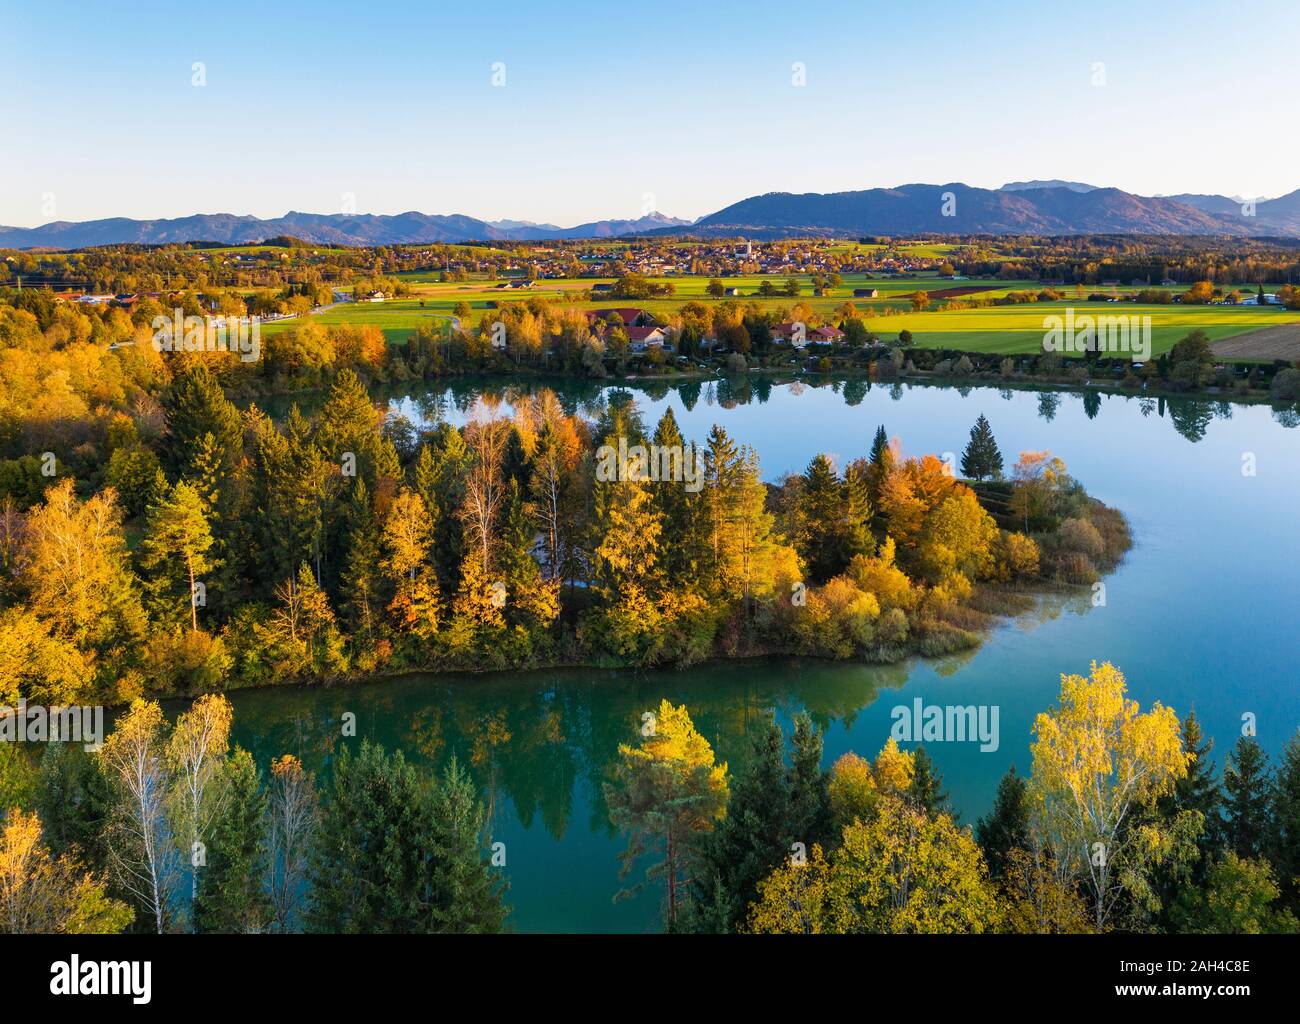 Germany, Bavaria, Upper Bavaria, Toelzer Land, Konigsdorf, Aerial view of Baggersee and forests in Autumn Stock Photo